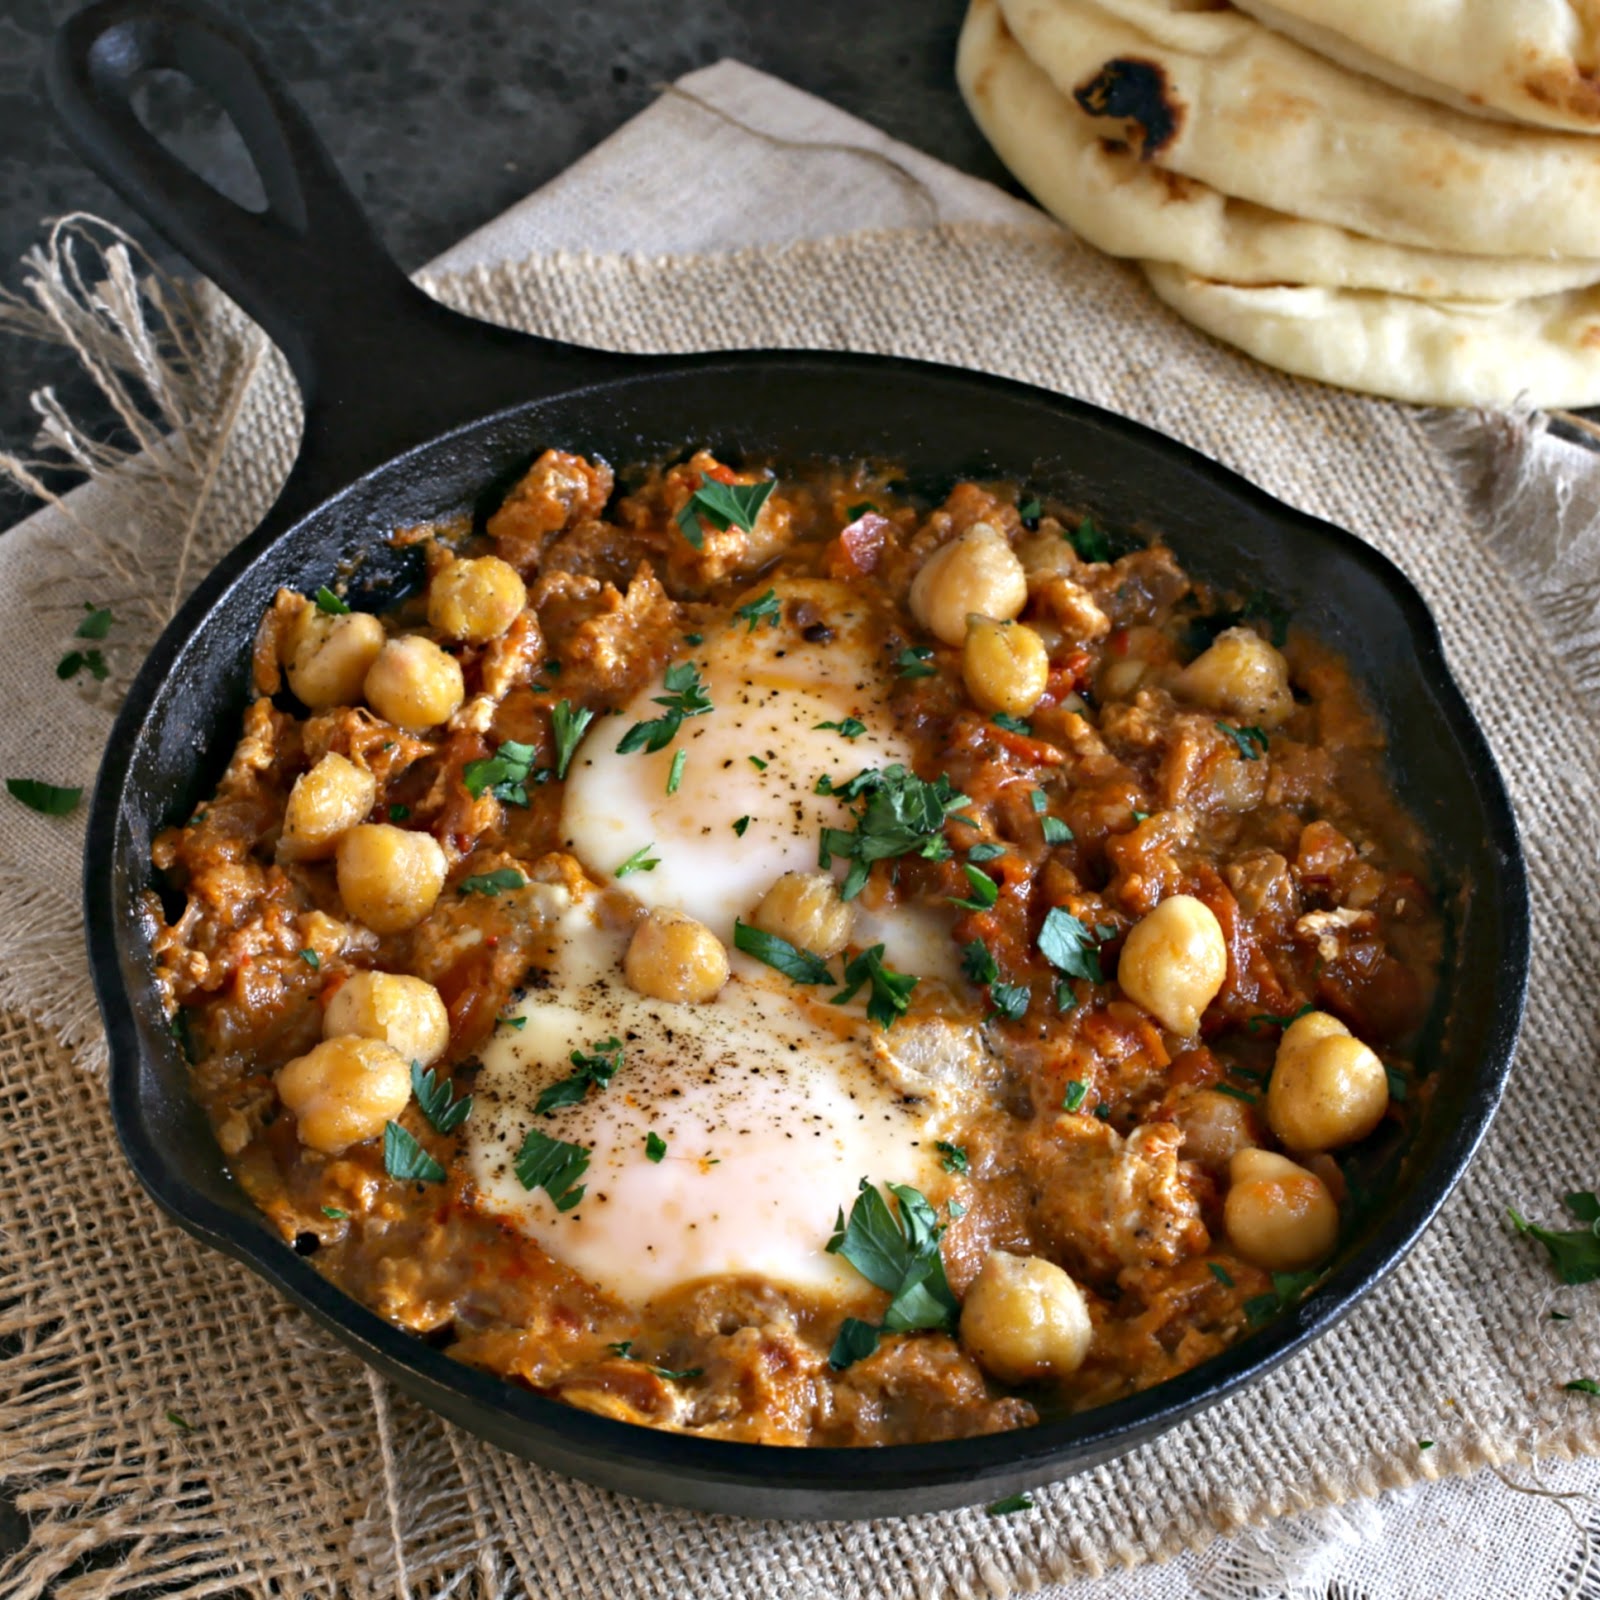 Crispy chickpeas and eggs poached in a shakshuka simmer sauce.